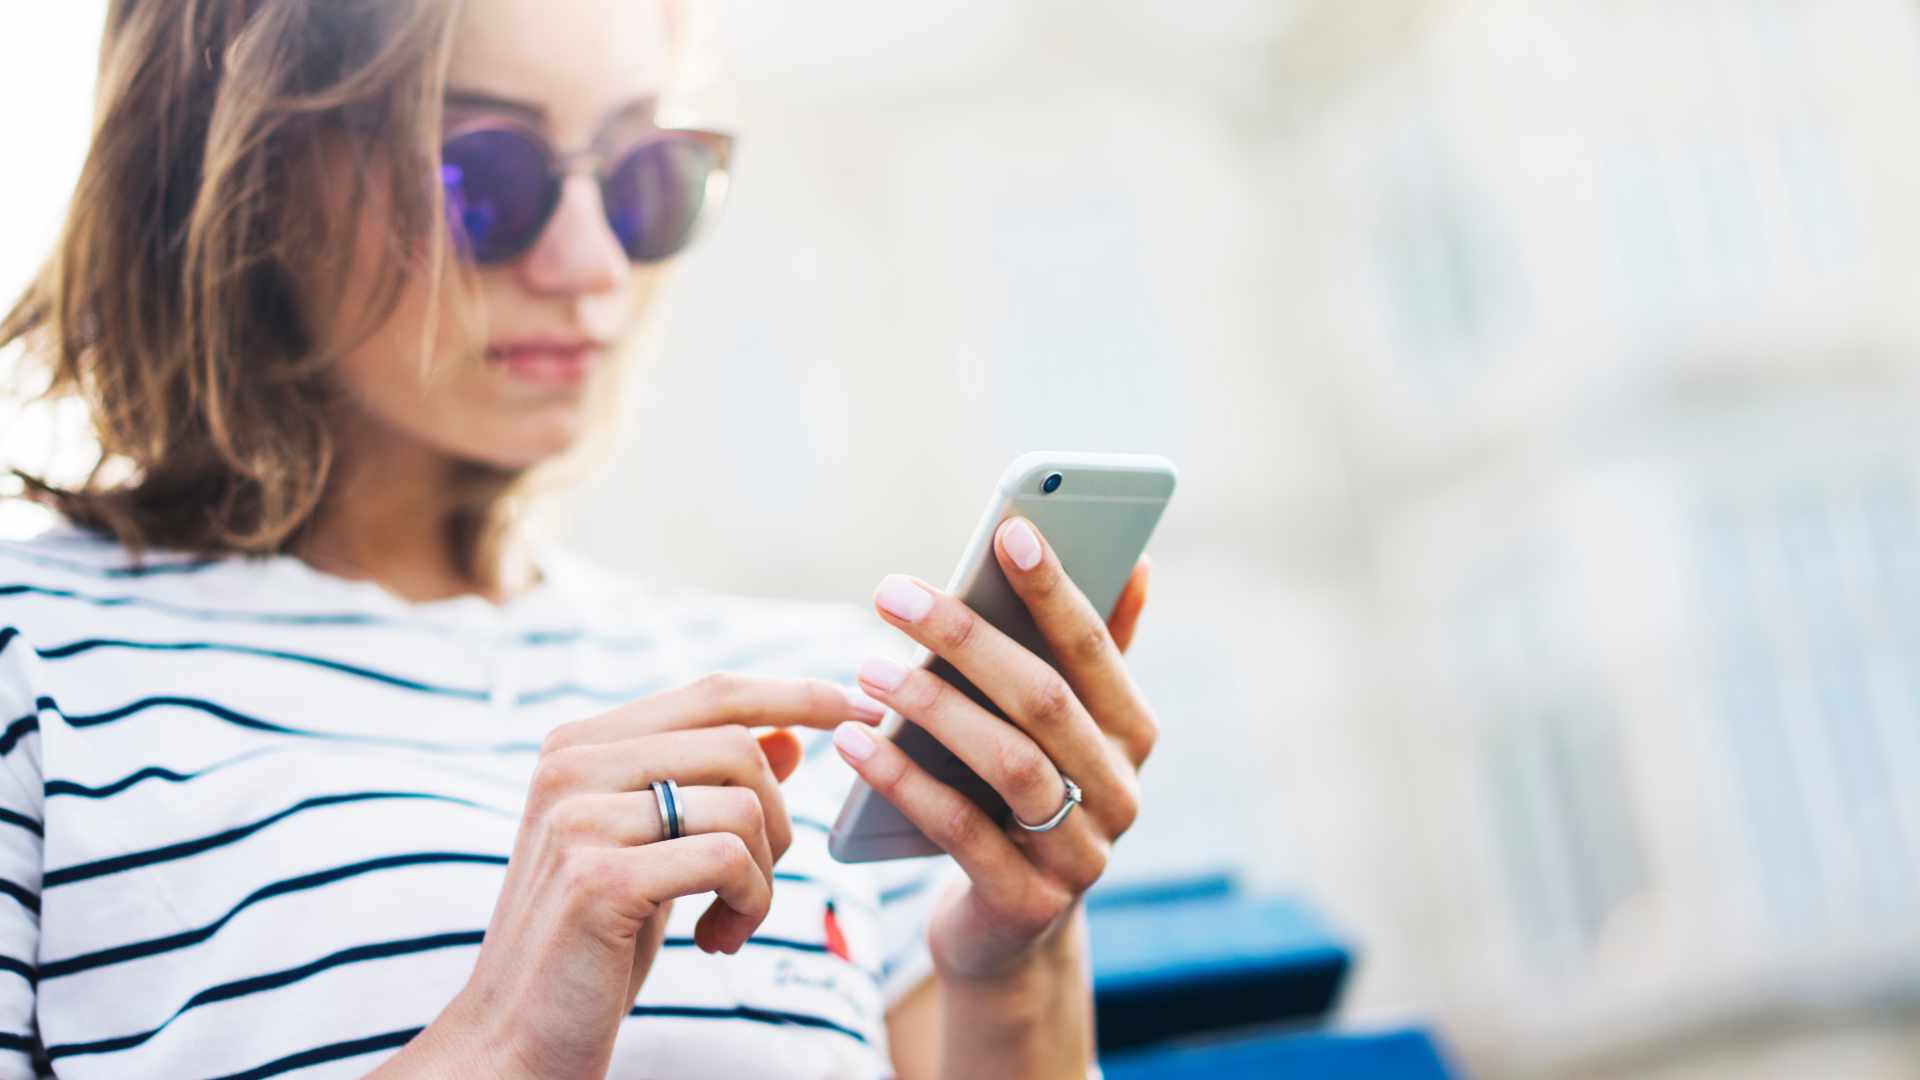 Modern SMS ensure customers and businesses stay connected without fail